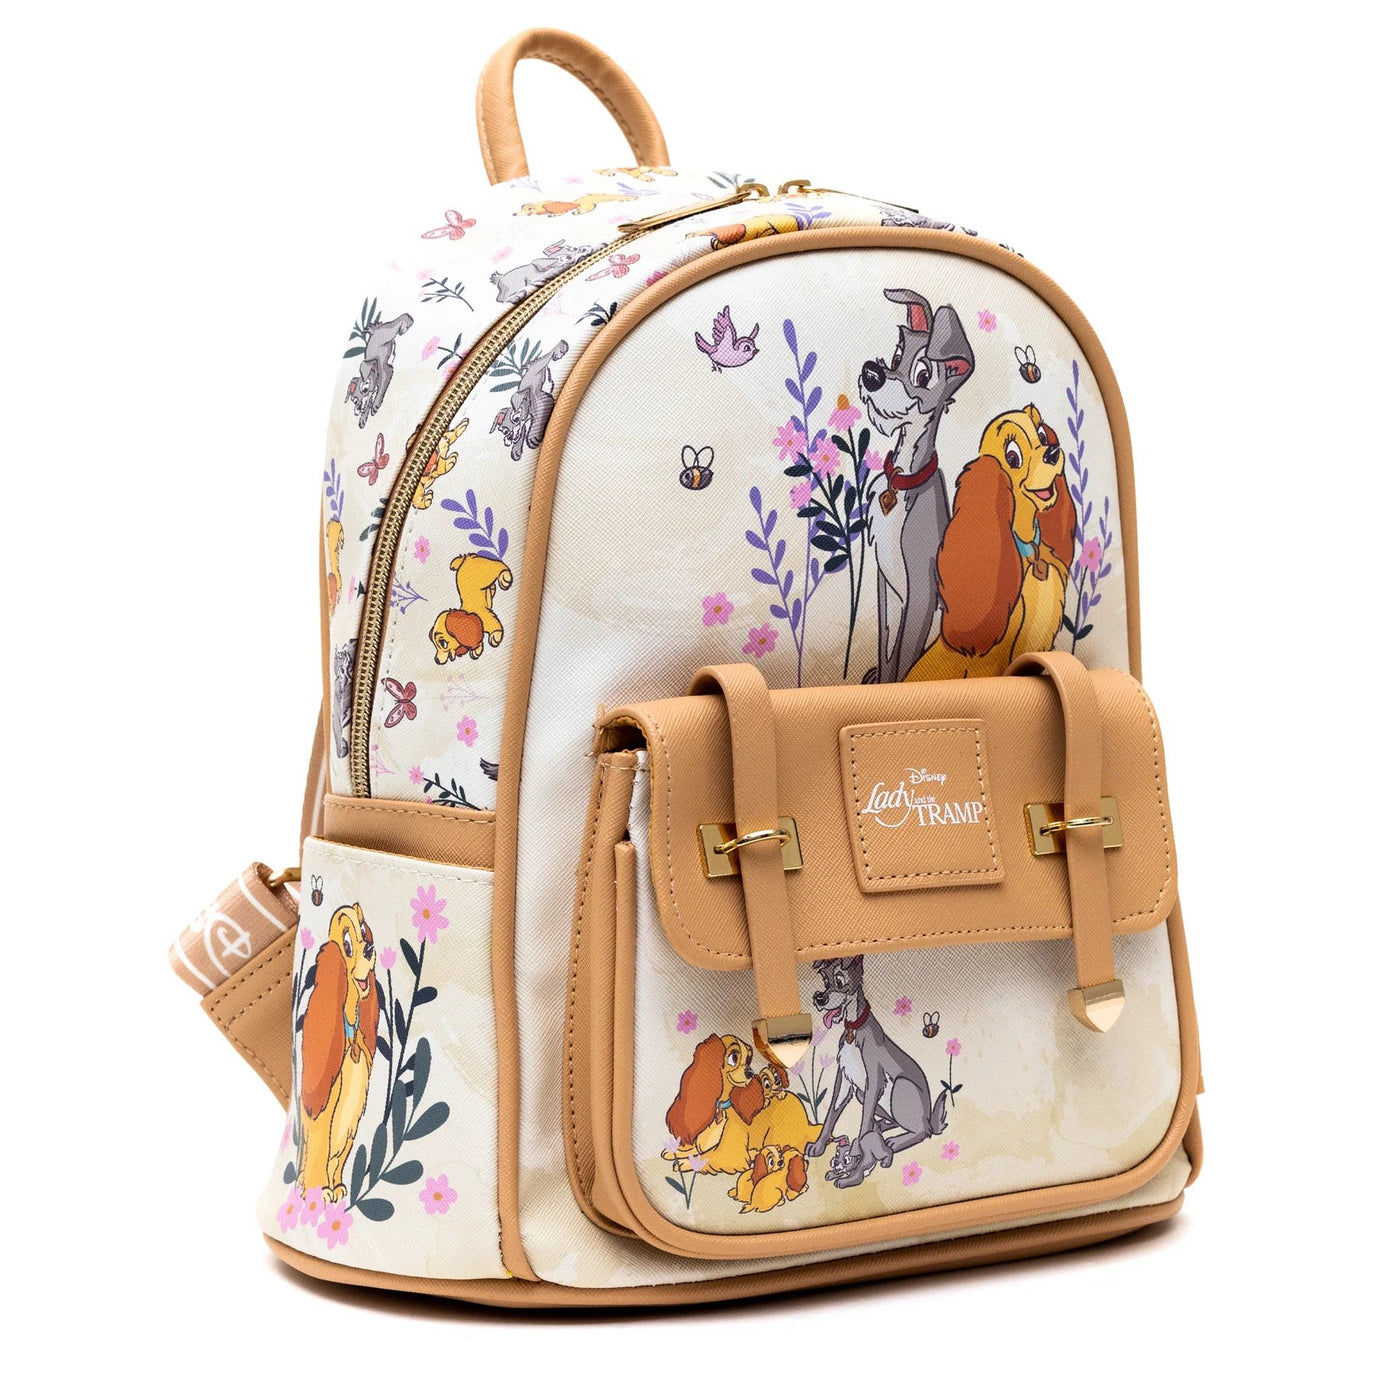 WondaPop Disney Pastel Lady and the Tramp Mini Backpack - Side View